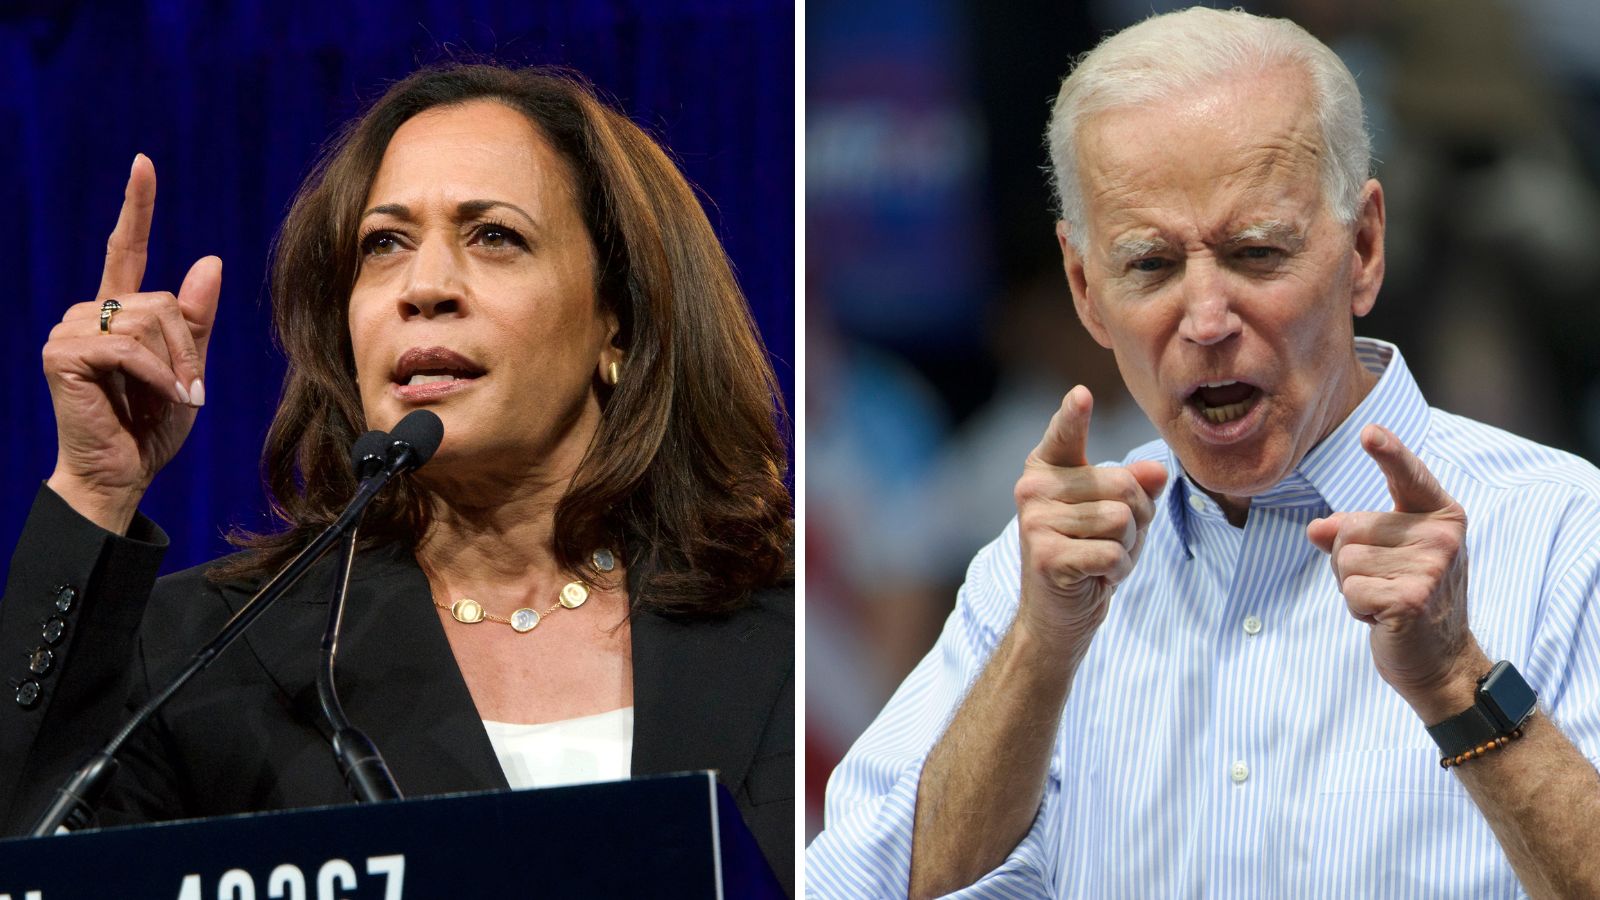 Harris Is a “Vital Part of the Formula” as Biden Faces Abysmal Polling Results